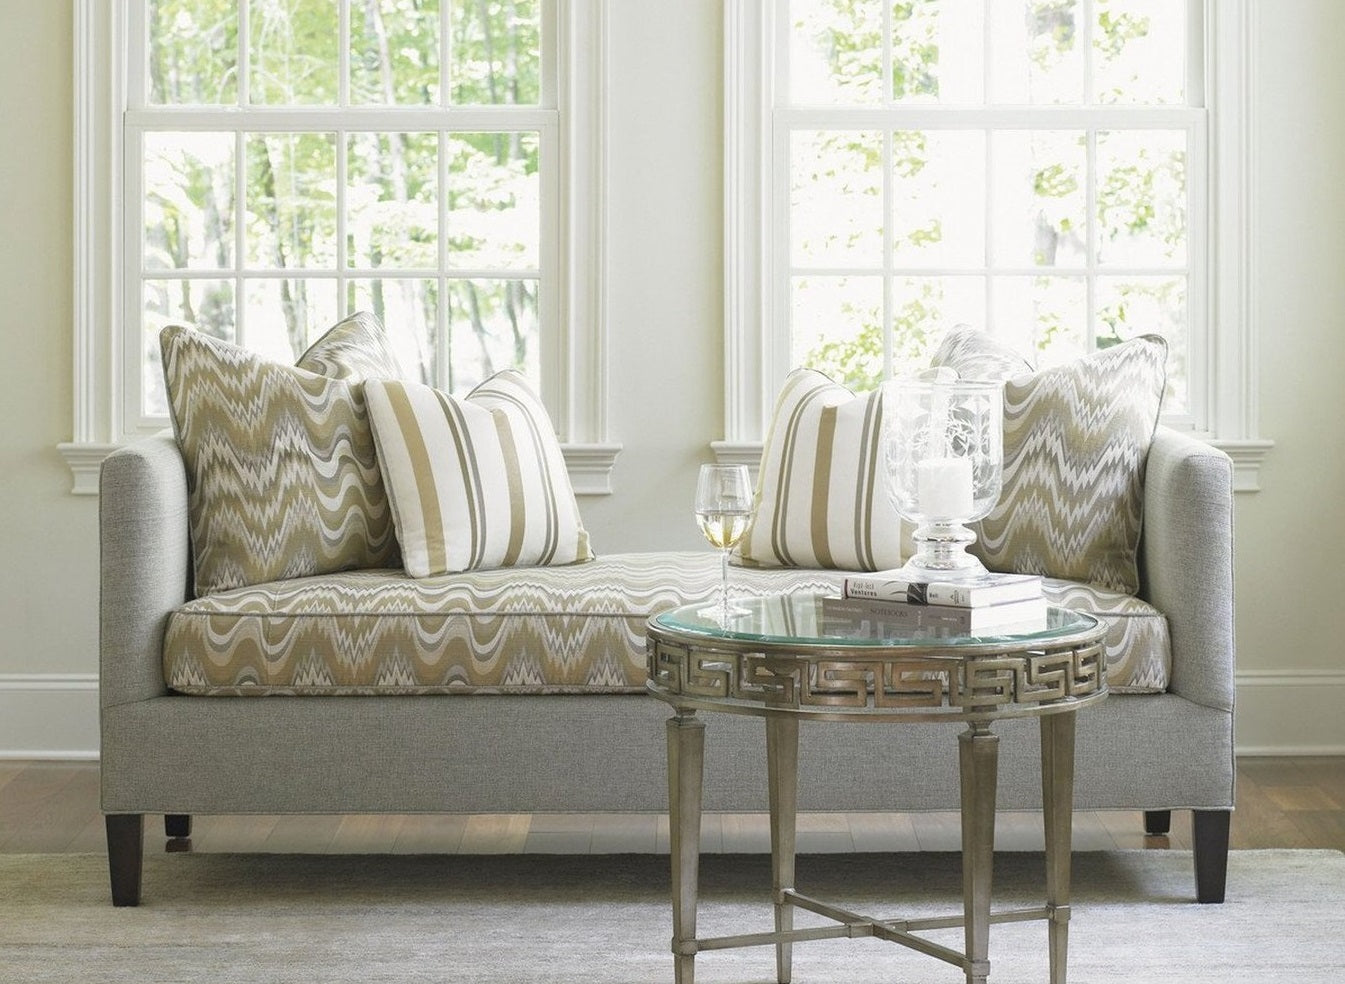 Decorate Your Home With Lexington Furniture